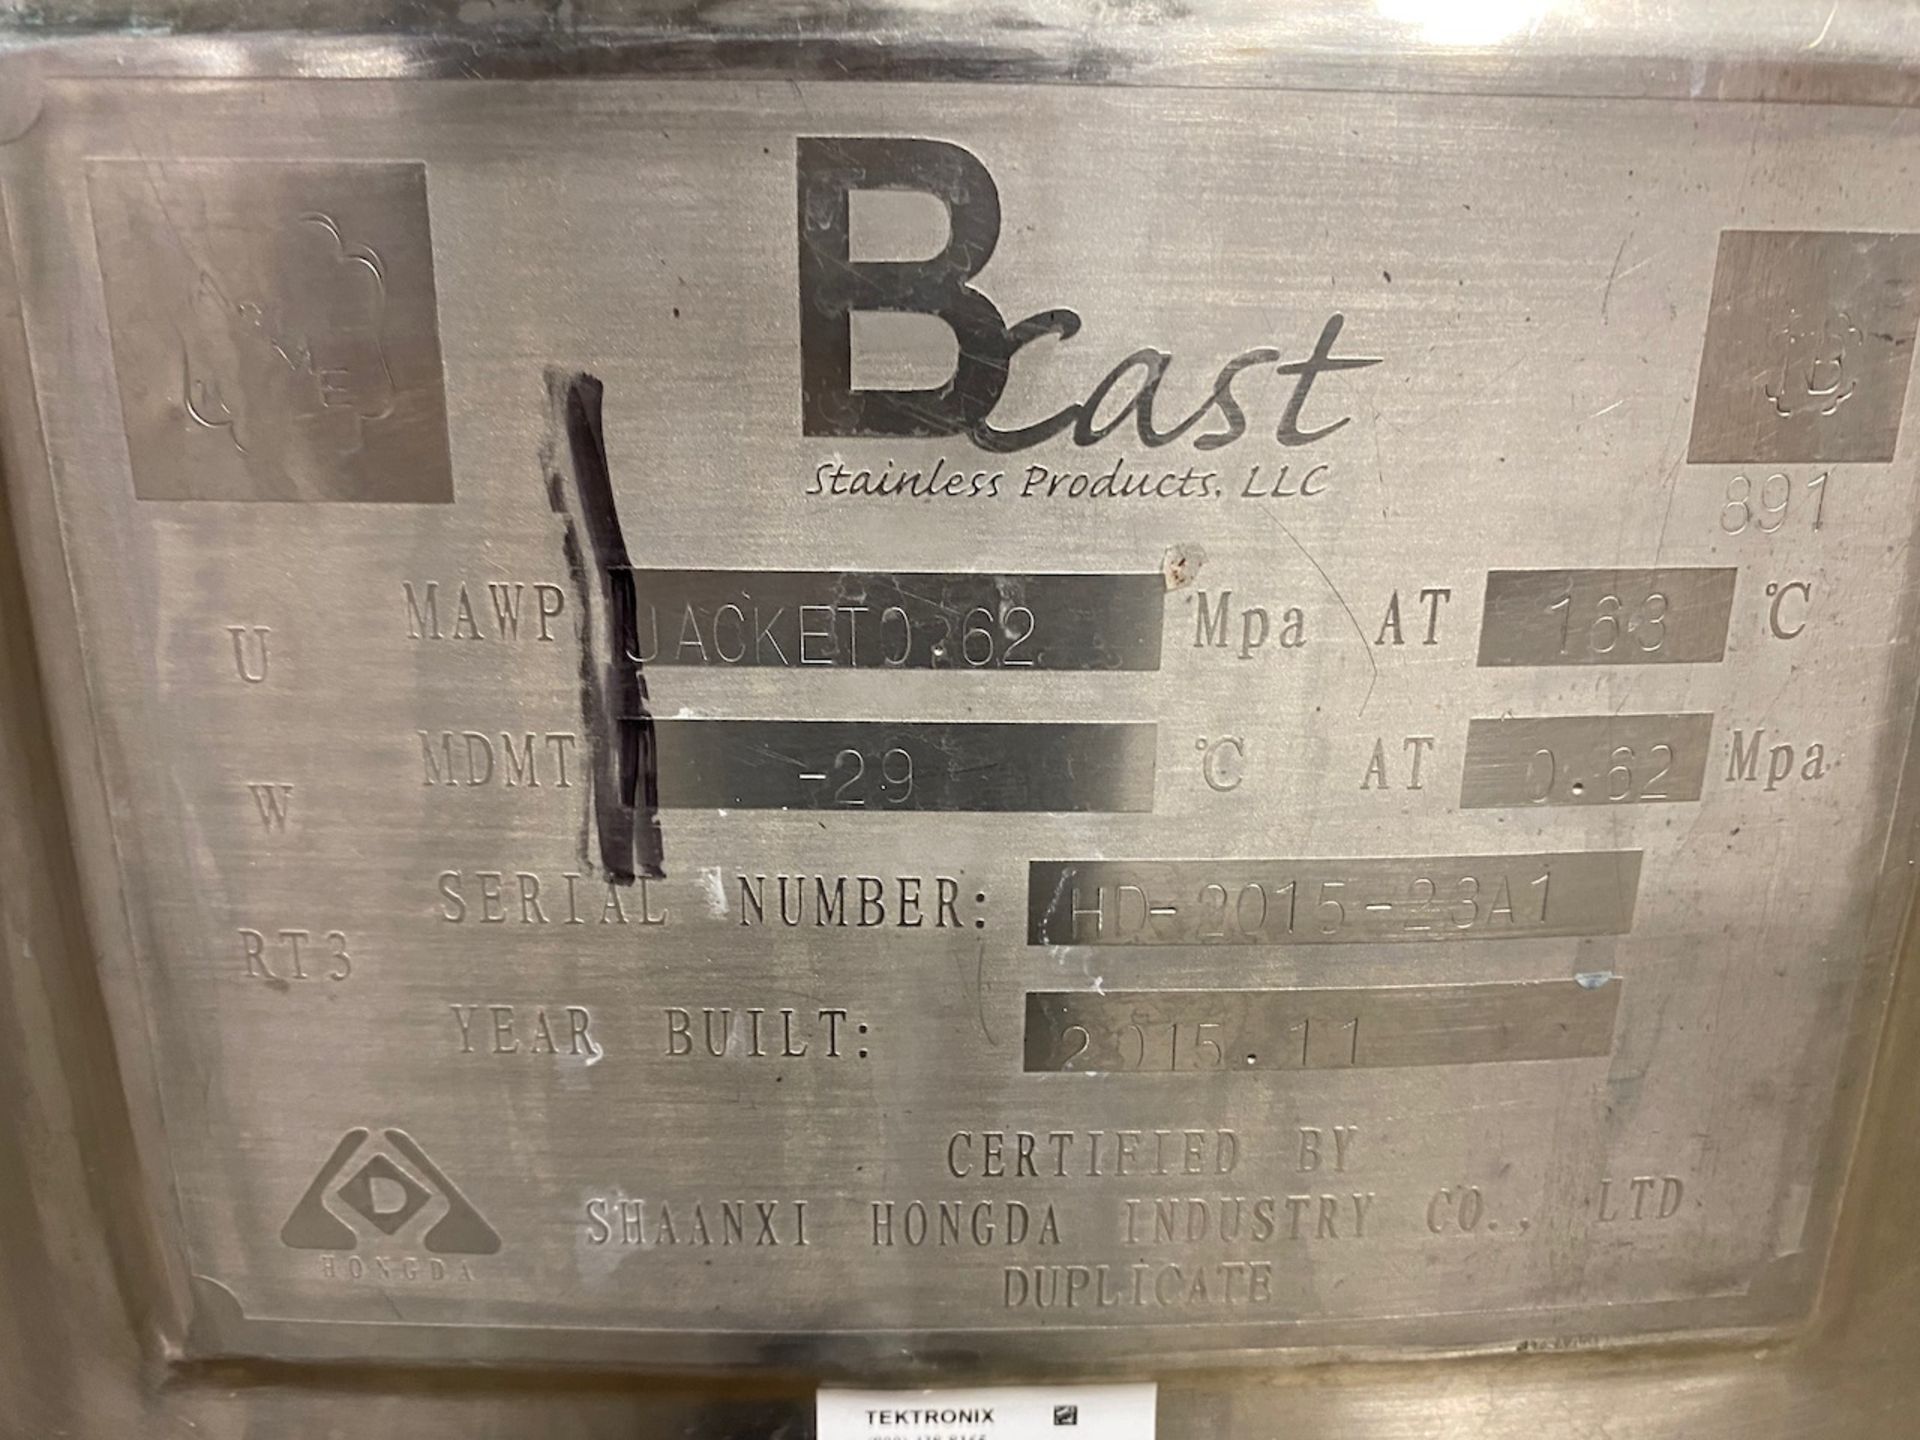 Bcast Stainless Products Jacketed Tank - Image 2 of 8